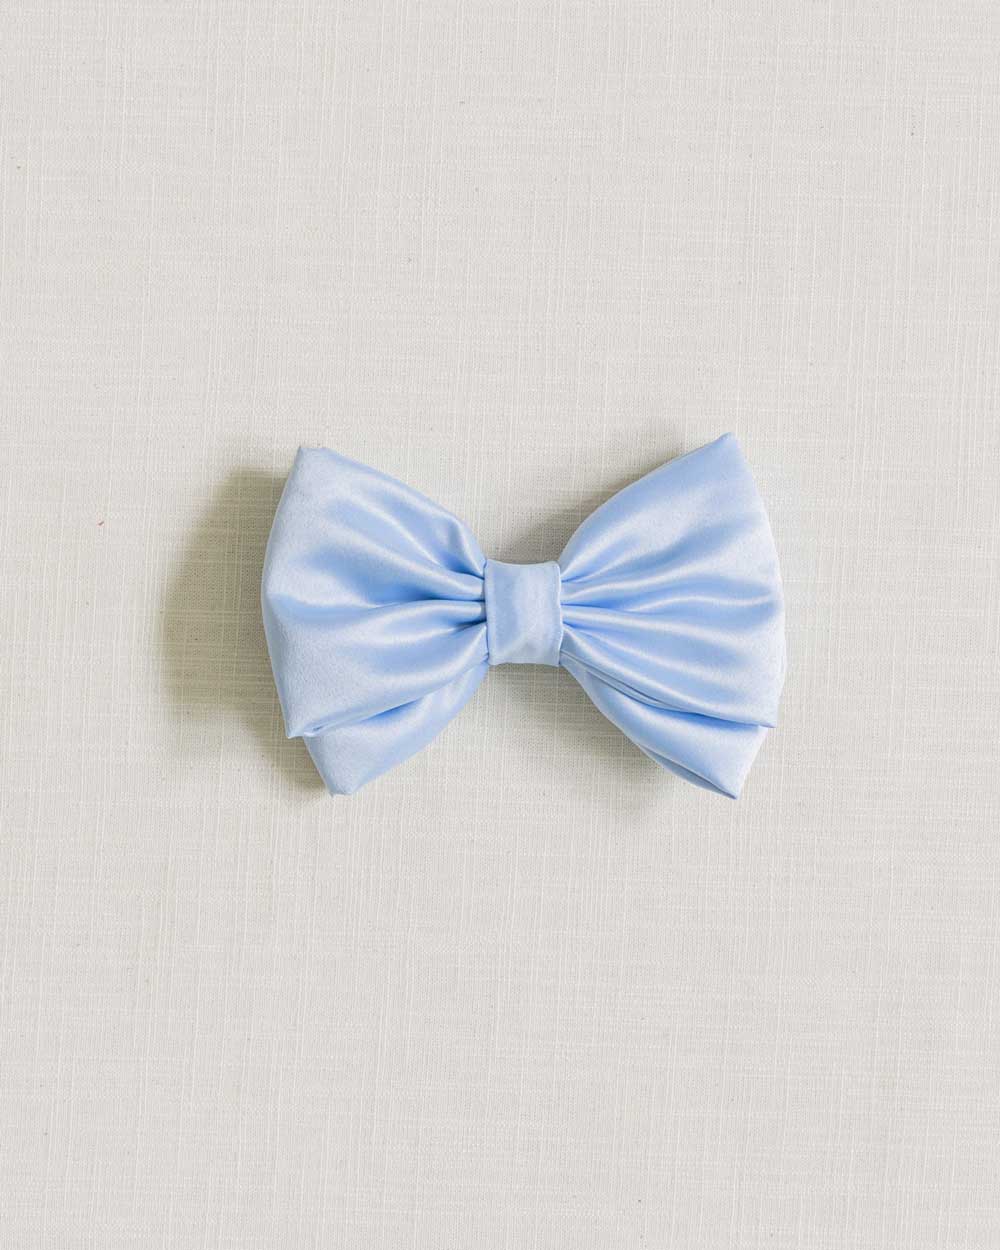 THE BLUE SATIN LUXE BOW